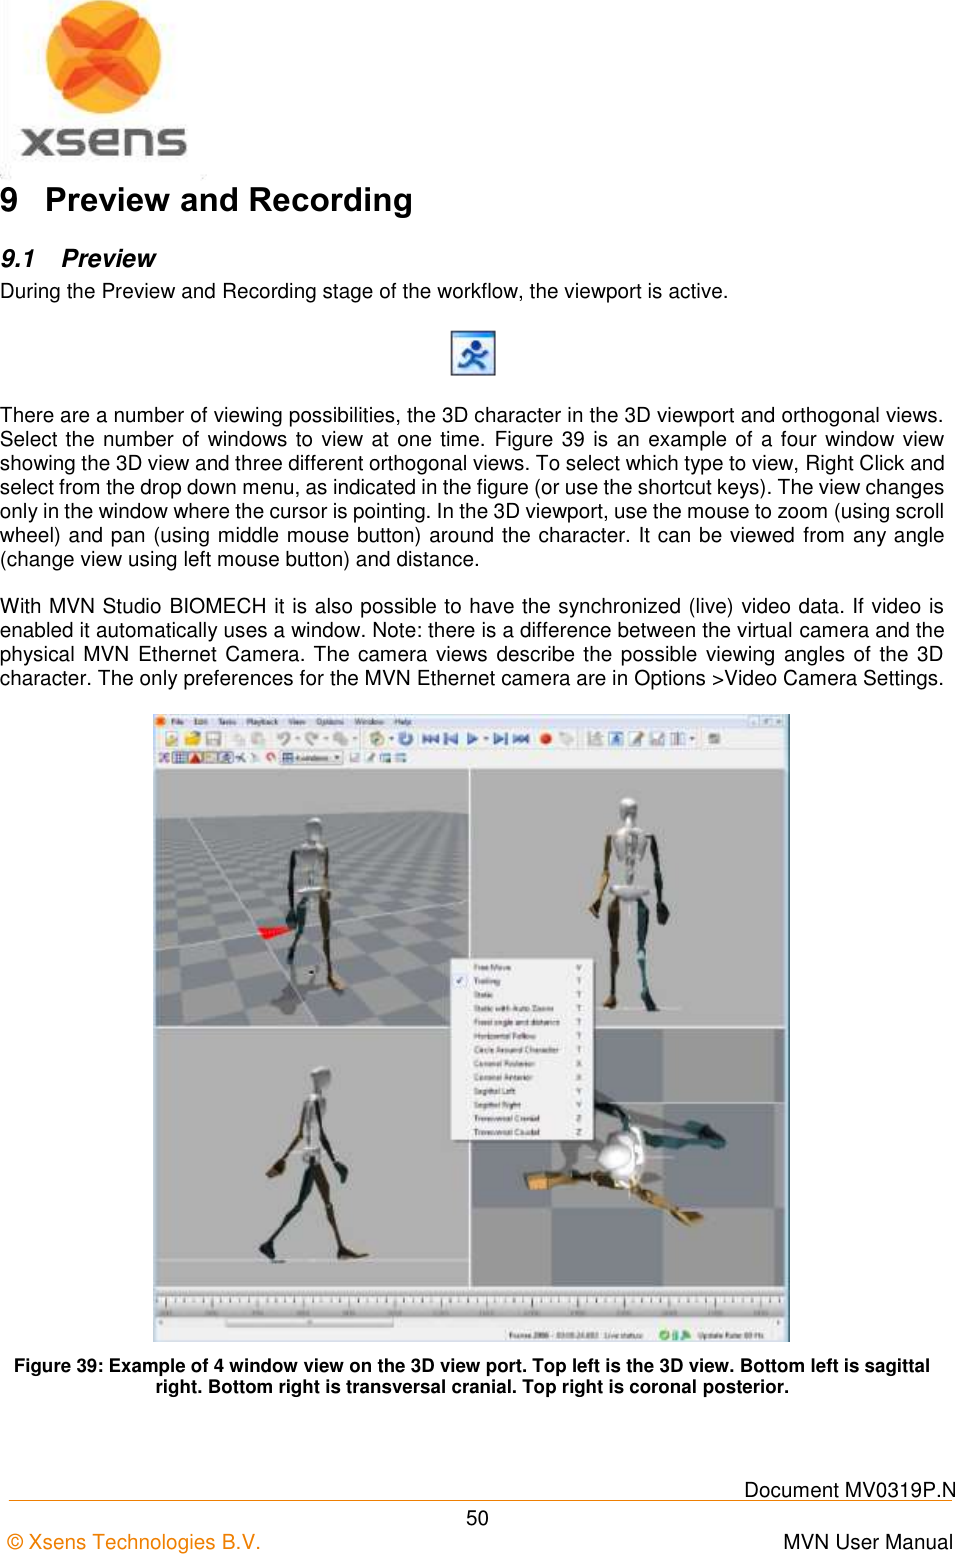    Document MV0319P.N © Xsens Technologies B.V.      MVN User Manual  50 9  Preview and Recording 9.1  Preview During the Preview and Recording stage of the workflow, the viewport is active.  There are a number of viewing possibilities, the 3D character in the 3D viewport and orthogonal views. Select the number of windows to view at one time.  Figure 39 is an example of a four window view showing the 3D view and three different orthogonal views. To select which type to view, Right Click and select from the drop down menu, as indicated in the figure (or use the shortcut keys). The view changes only in the window where the cursor is pointing. In the 3D viewport, use the mouse to zoom (using scroll wheel) and pan (using middle mouse button) around the character. It can be viewed from any angle (change view using left mouse button) and distance.  With MVN Studio BIOMECH it is also possible to have the synchronized (live) video data. If video is enabled it automatically uses a window. Note: there is a difference between the virtual camera and the physical MVN  Ethernet Camera. The camera views describe the possible  viewing angles of the 3D character. The only preferences for the MVN Ethernet camera are in Options &gt;Video Camera Settings.   Figure 39: Example of 4 window view on the 3D view port. Top left is the 3D view. Bottom left is sagittal right. Bottom right is transversal cranial. Top right is coronal posterior. 